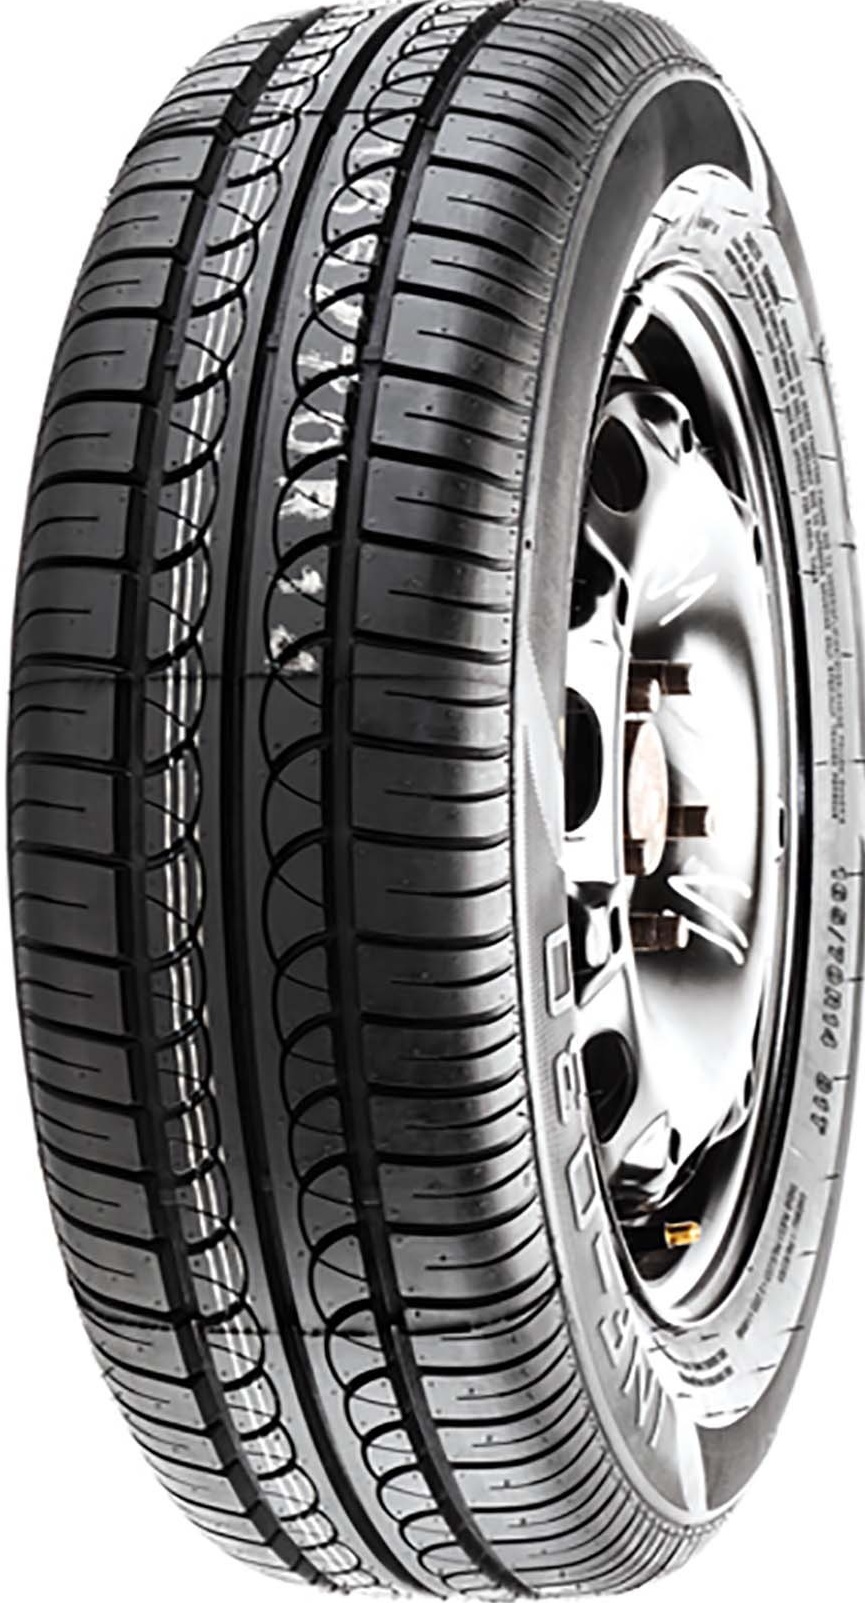 INFINITY INF030 175/65 R 13 80T